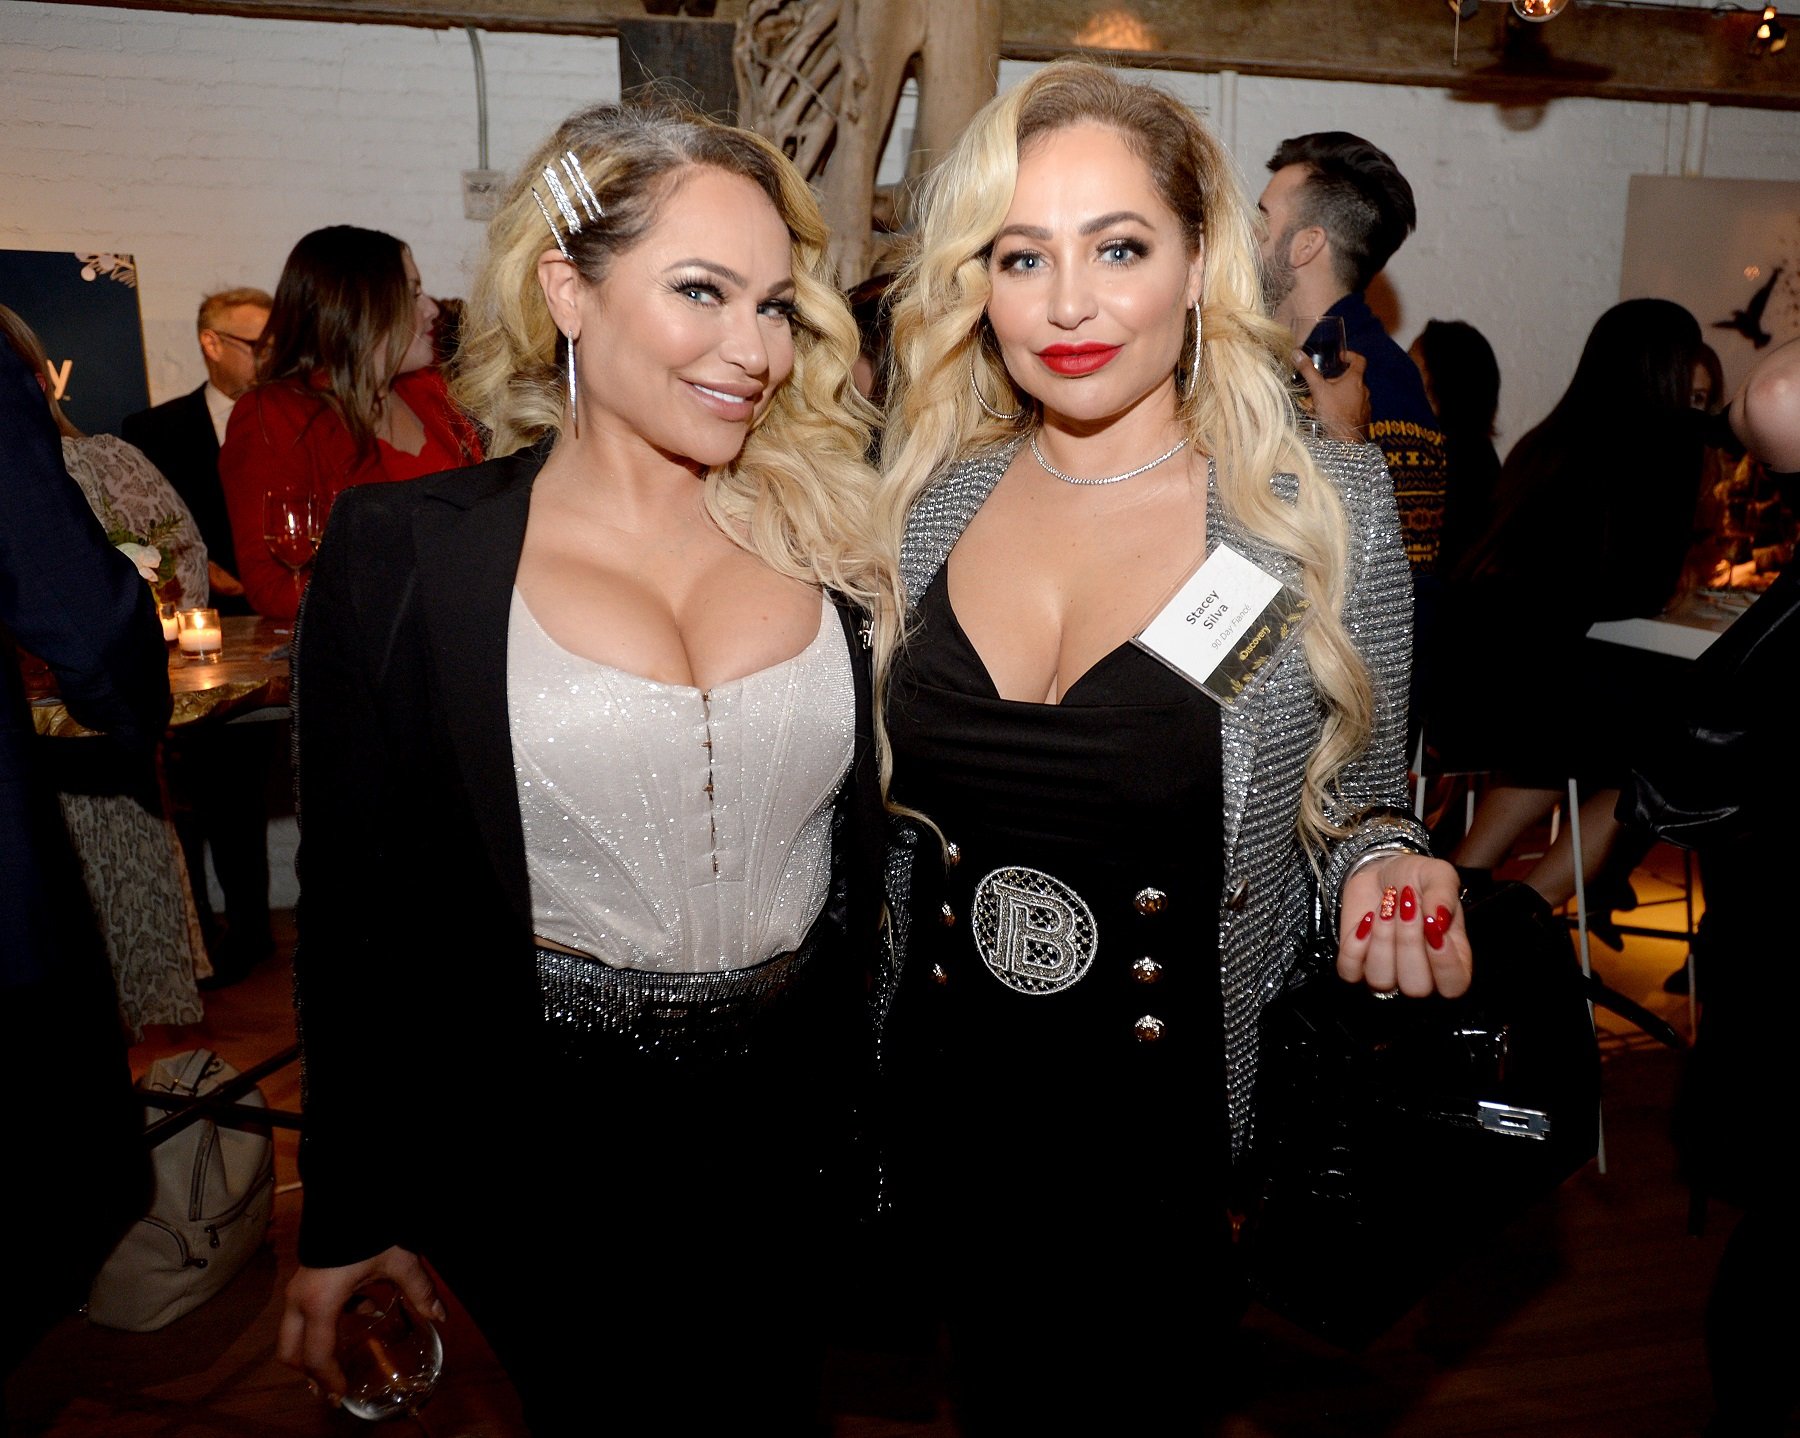 Darcey Silva and Stacey Silva of ‘Darcey & Stacey’ -- Darcey and Stacey Silva pose in deep-necked tops with business jackets at an event, years after Darcey's ex-husband and her split.